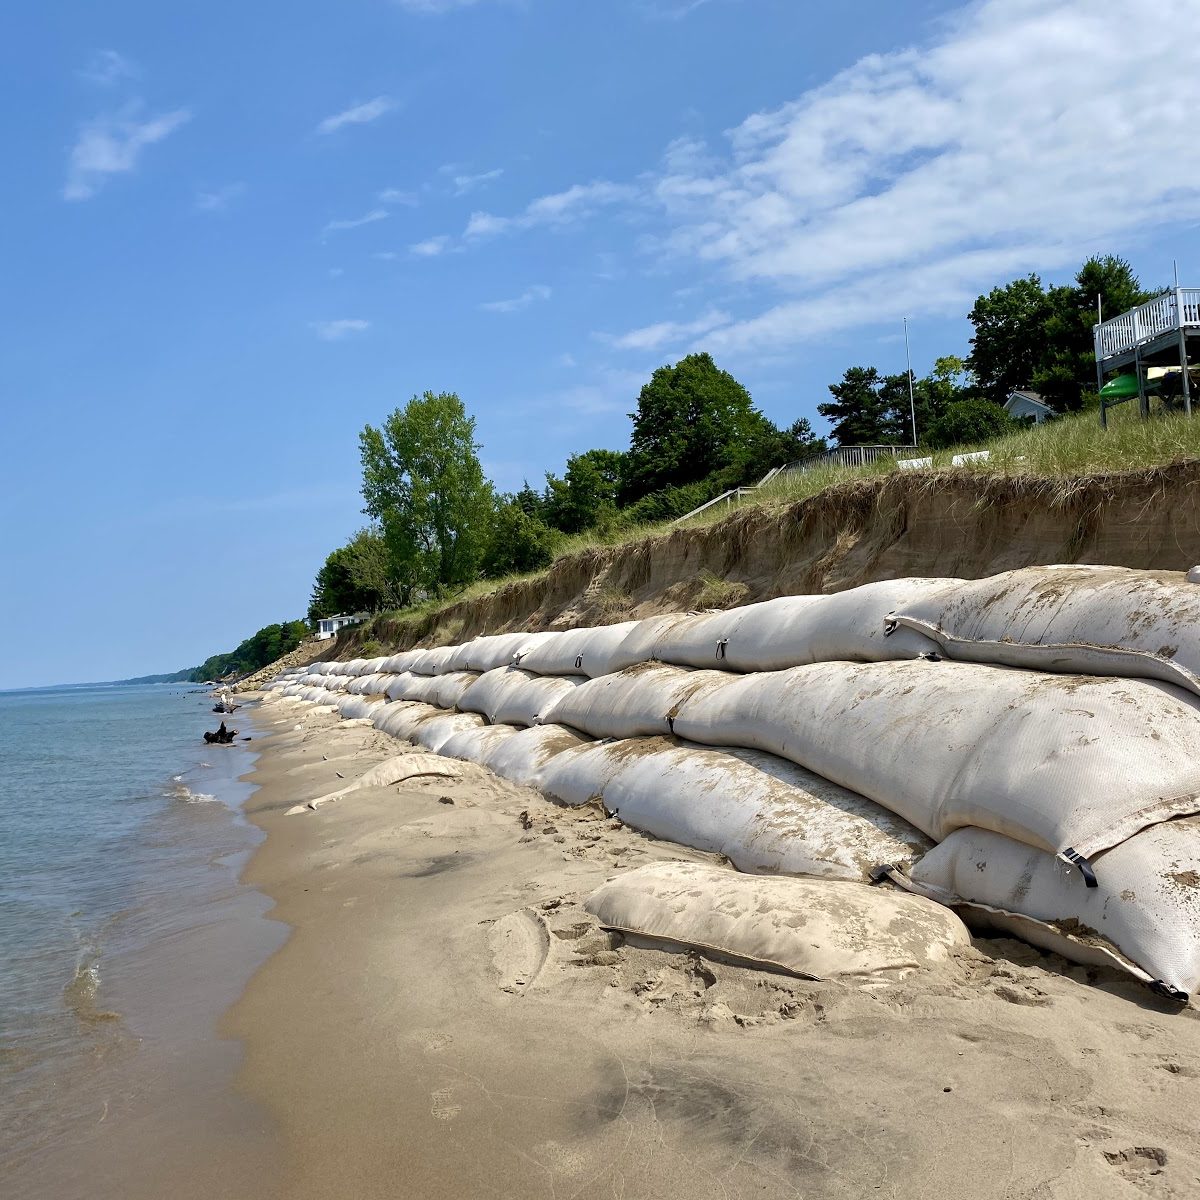 geotextile tubes or sand bags